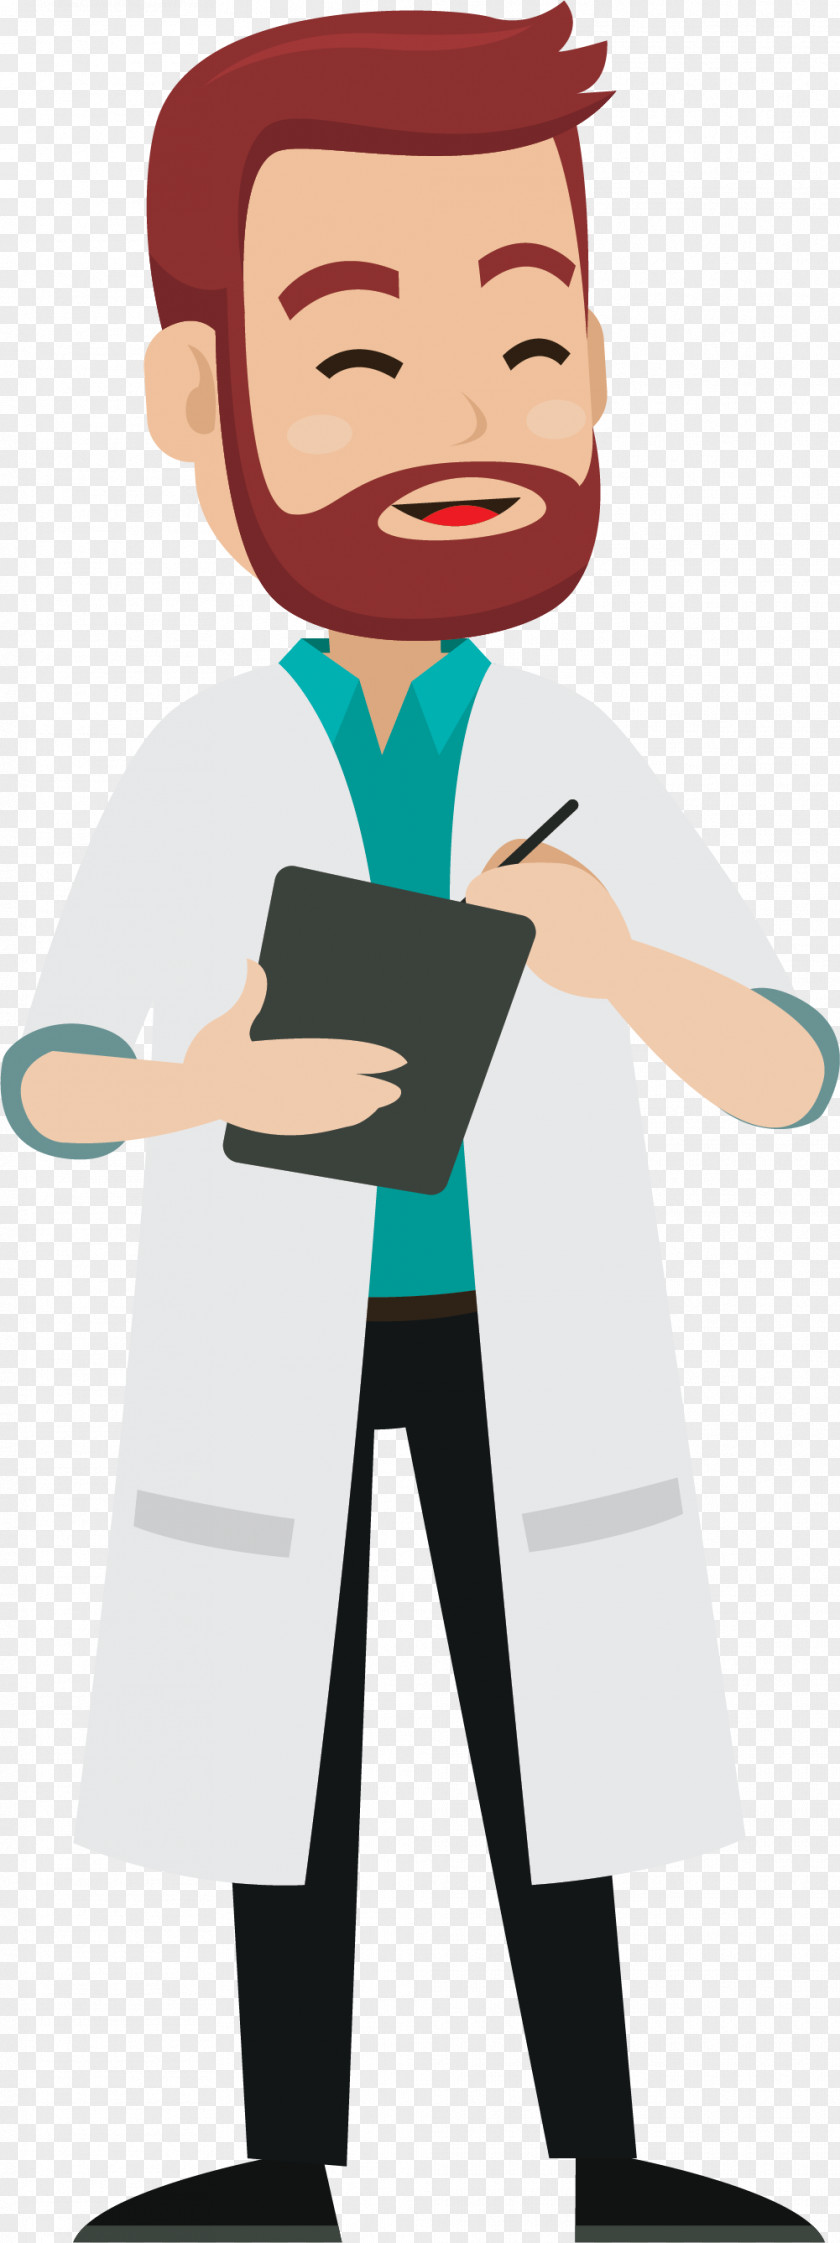 Cartoon Male Doctor Physician Illustration PNG